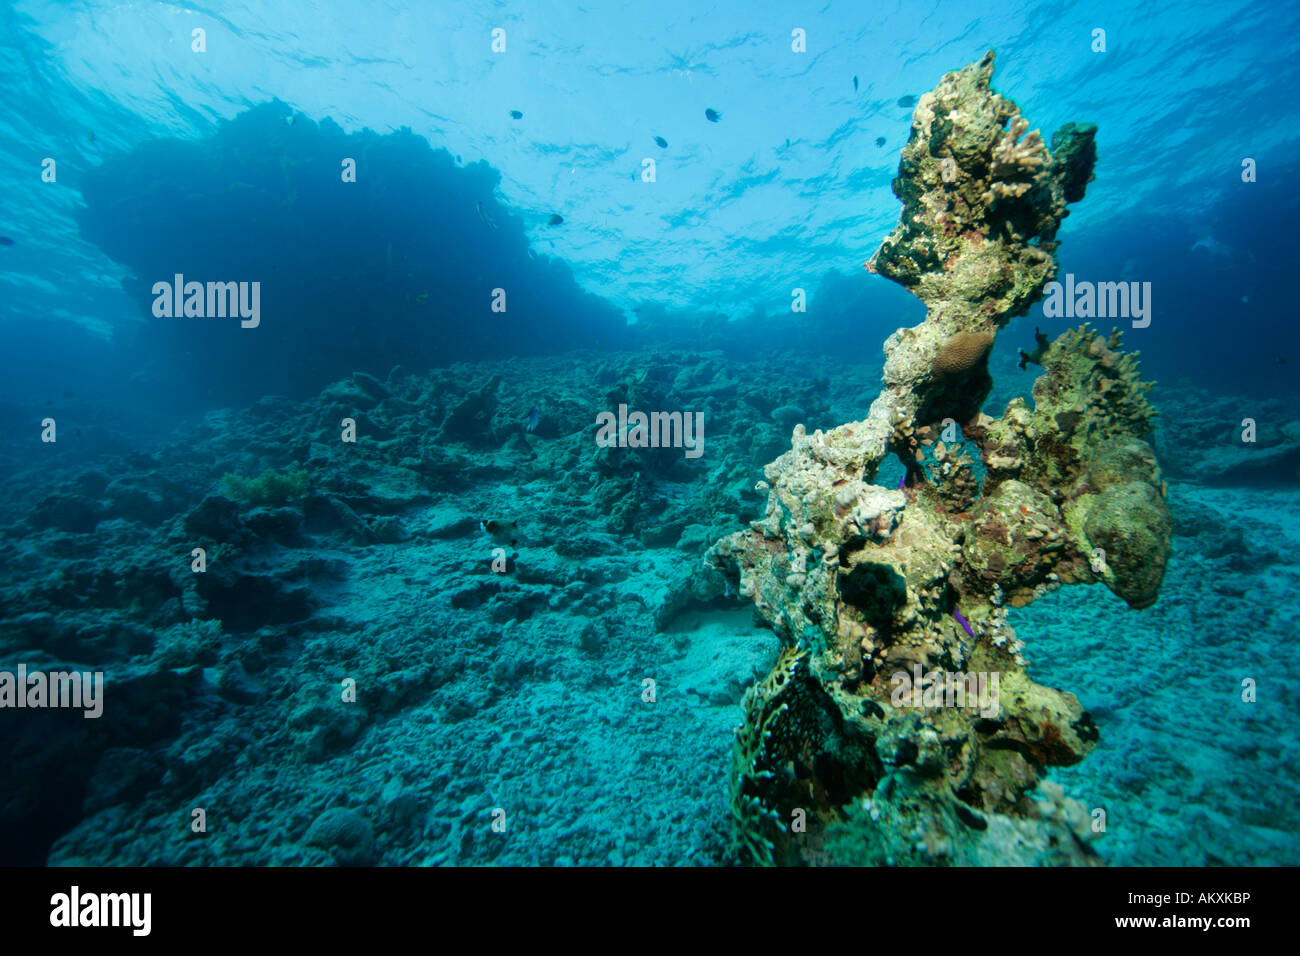 Dead coral reefs, destroyed corals, caused by waves. Stock Photo